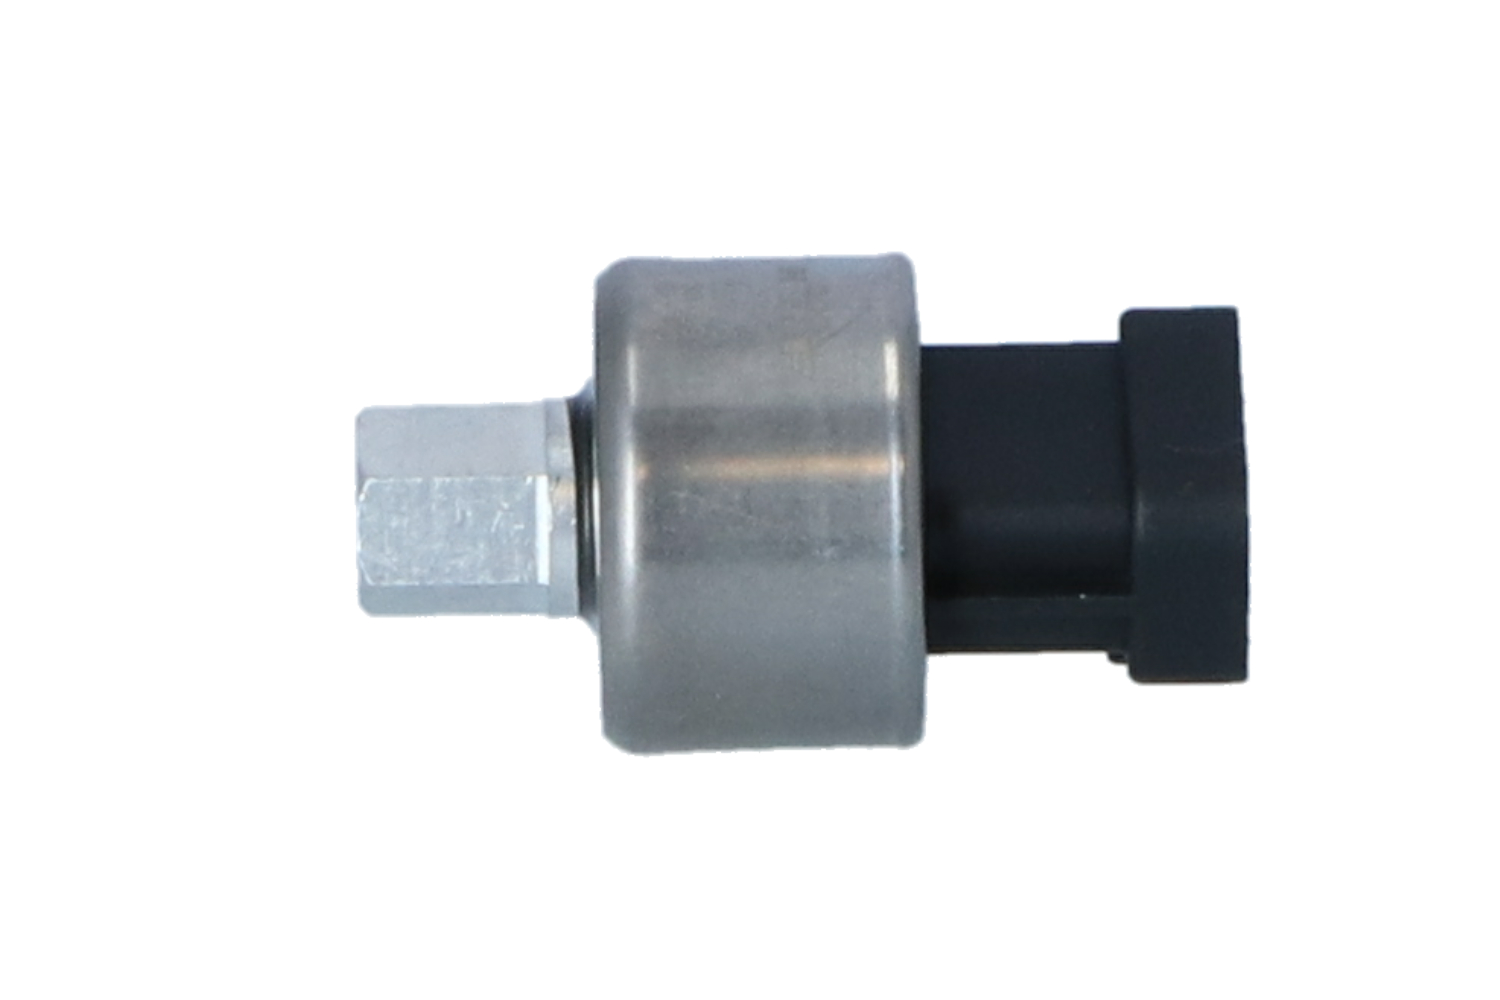 Opel Air conditioning pressure switch NRF 38929 at a good price